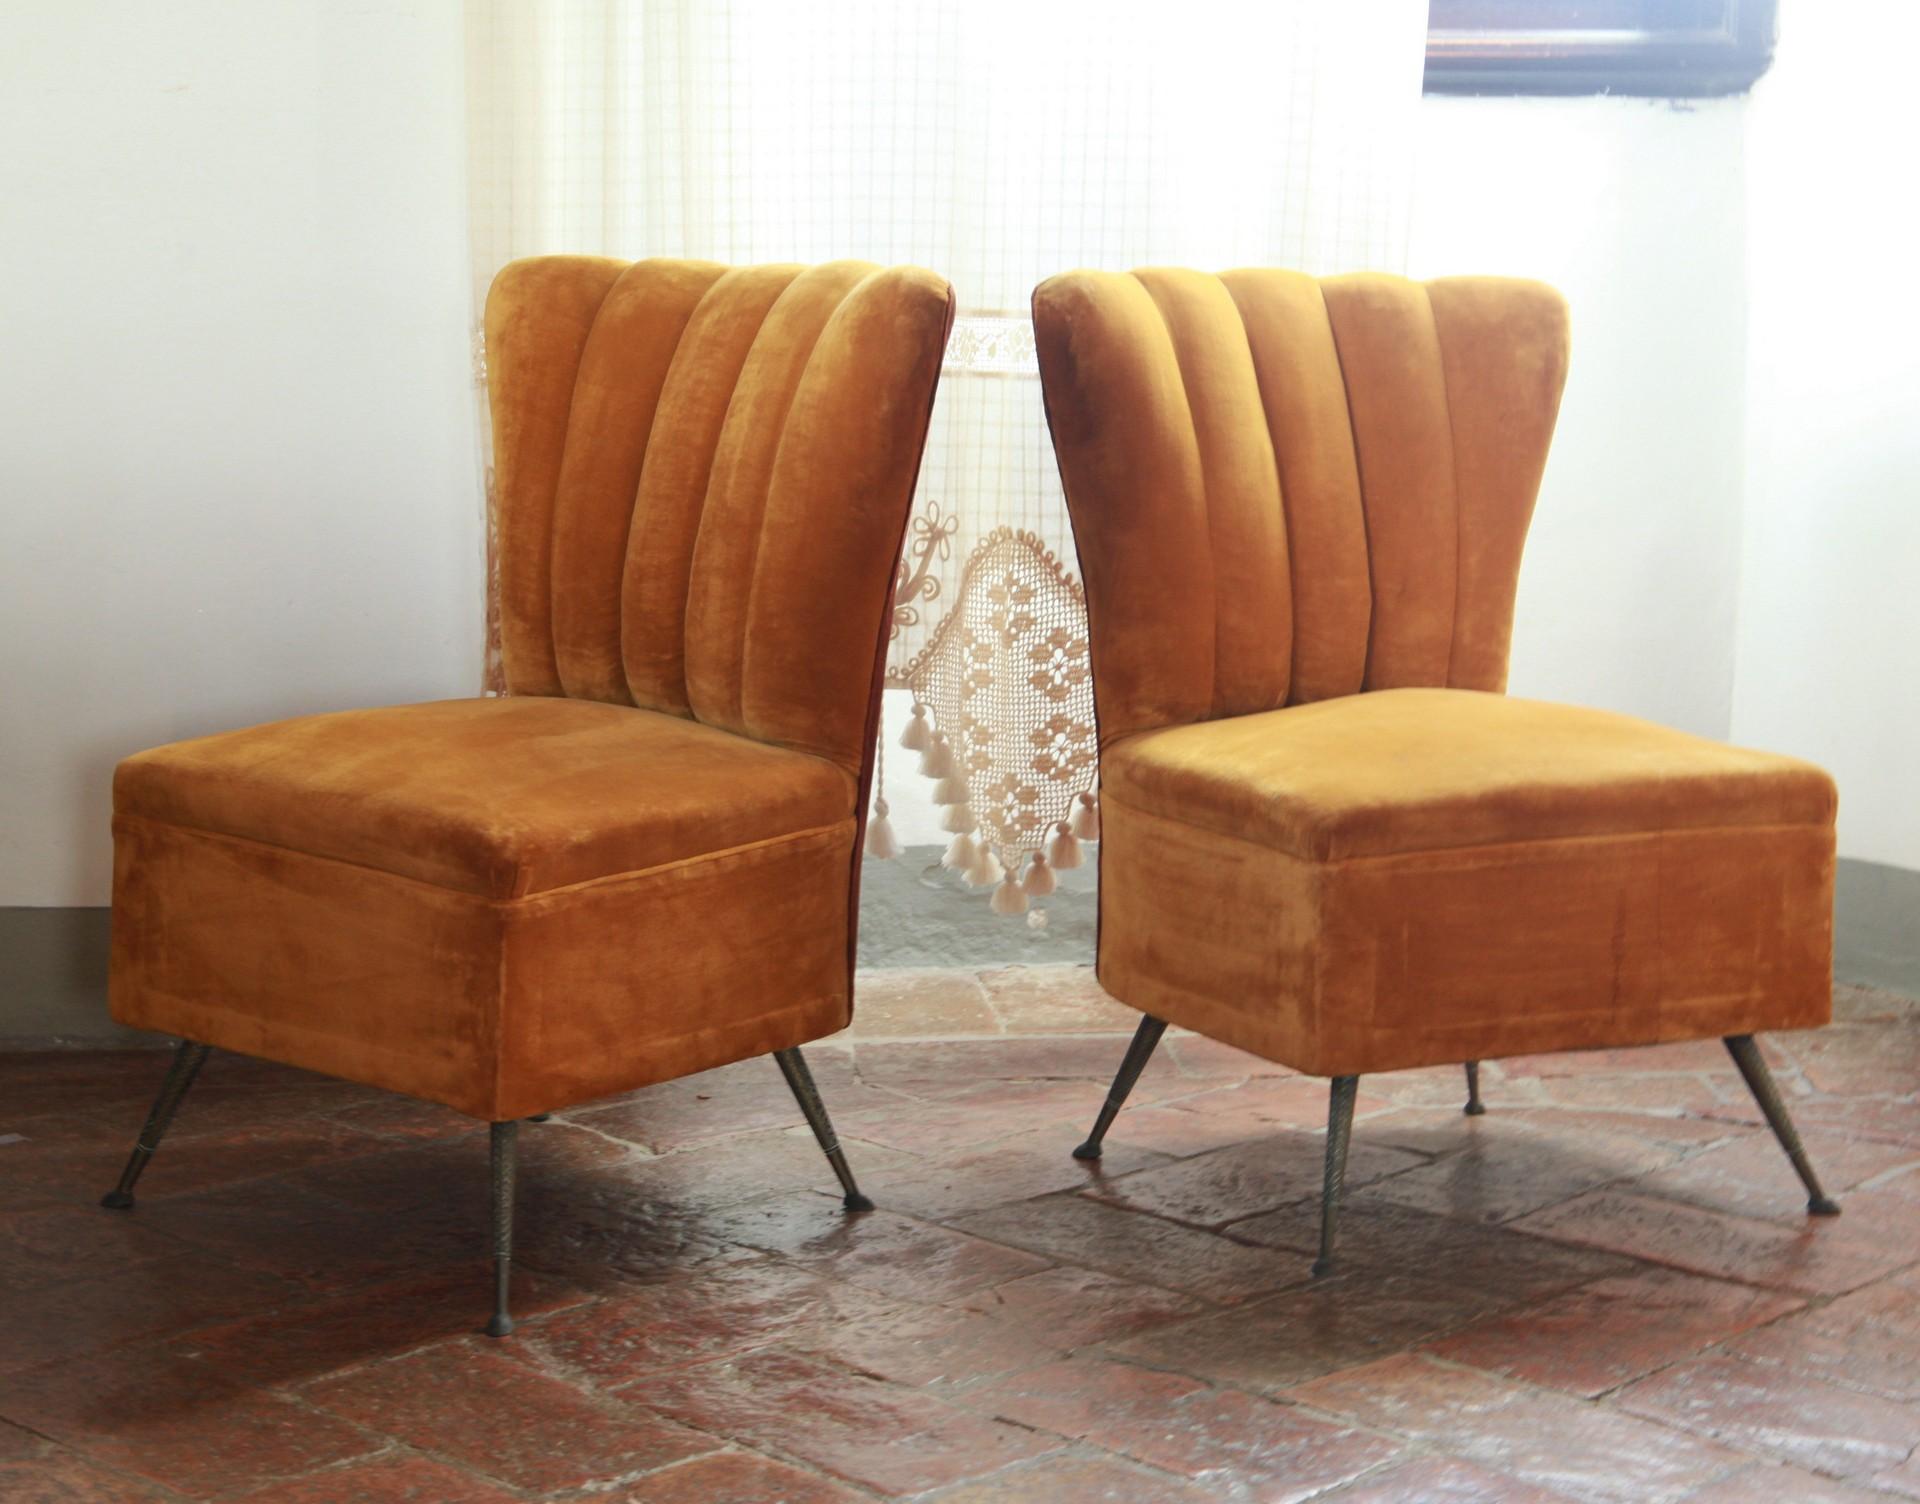 Two charming small scallop upholstered chairs. Part of the same set (see last photo). The chairs have an incredible care for details. 
Brass legs are in casting fusion and are probably made to represent fish or reptile skin. 
The quality of